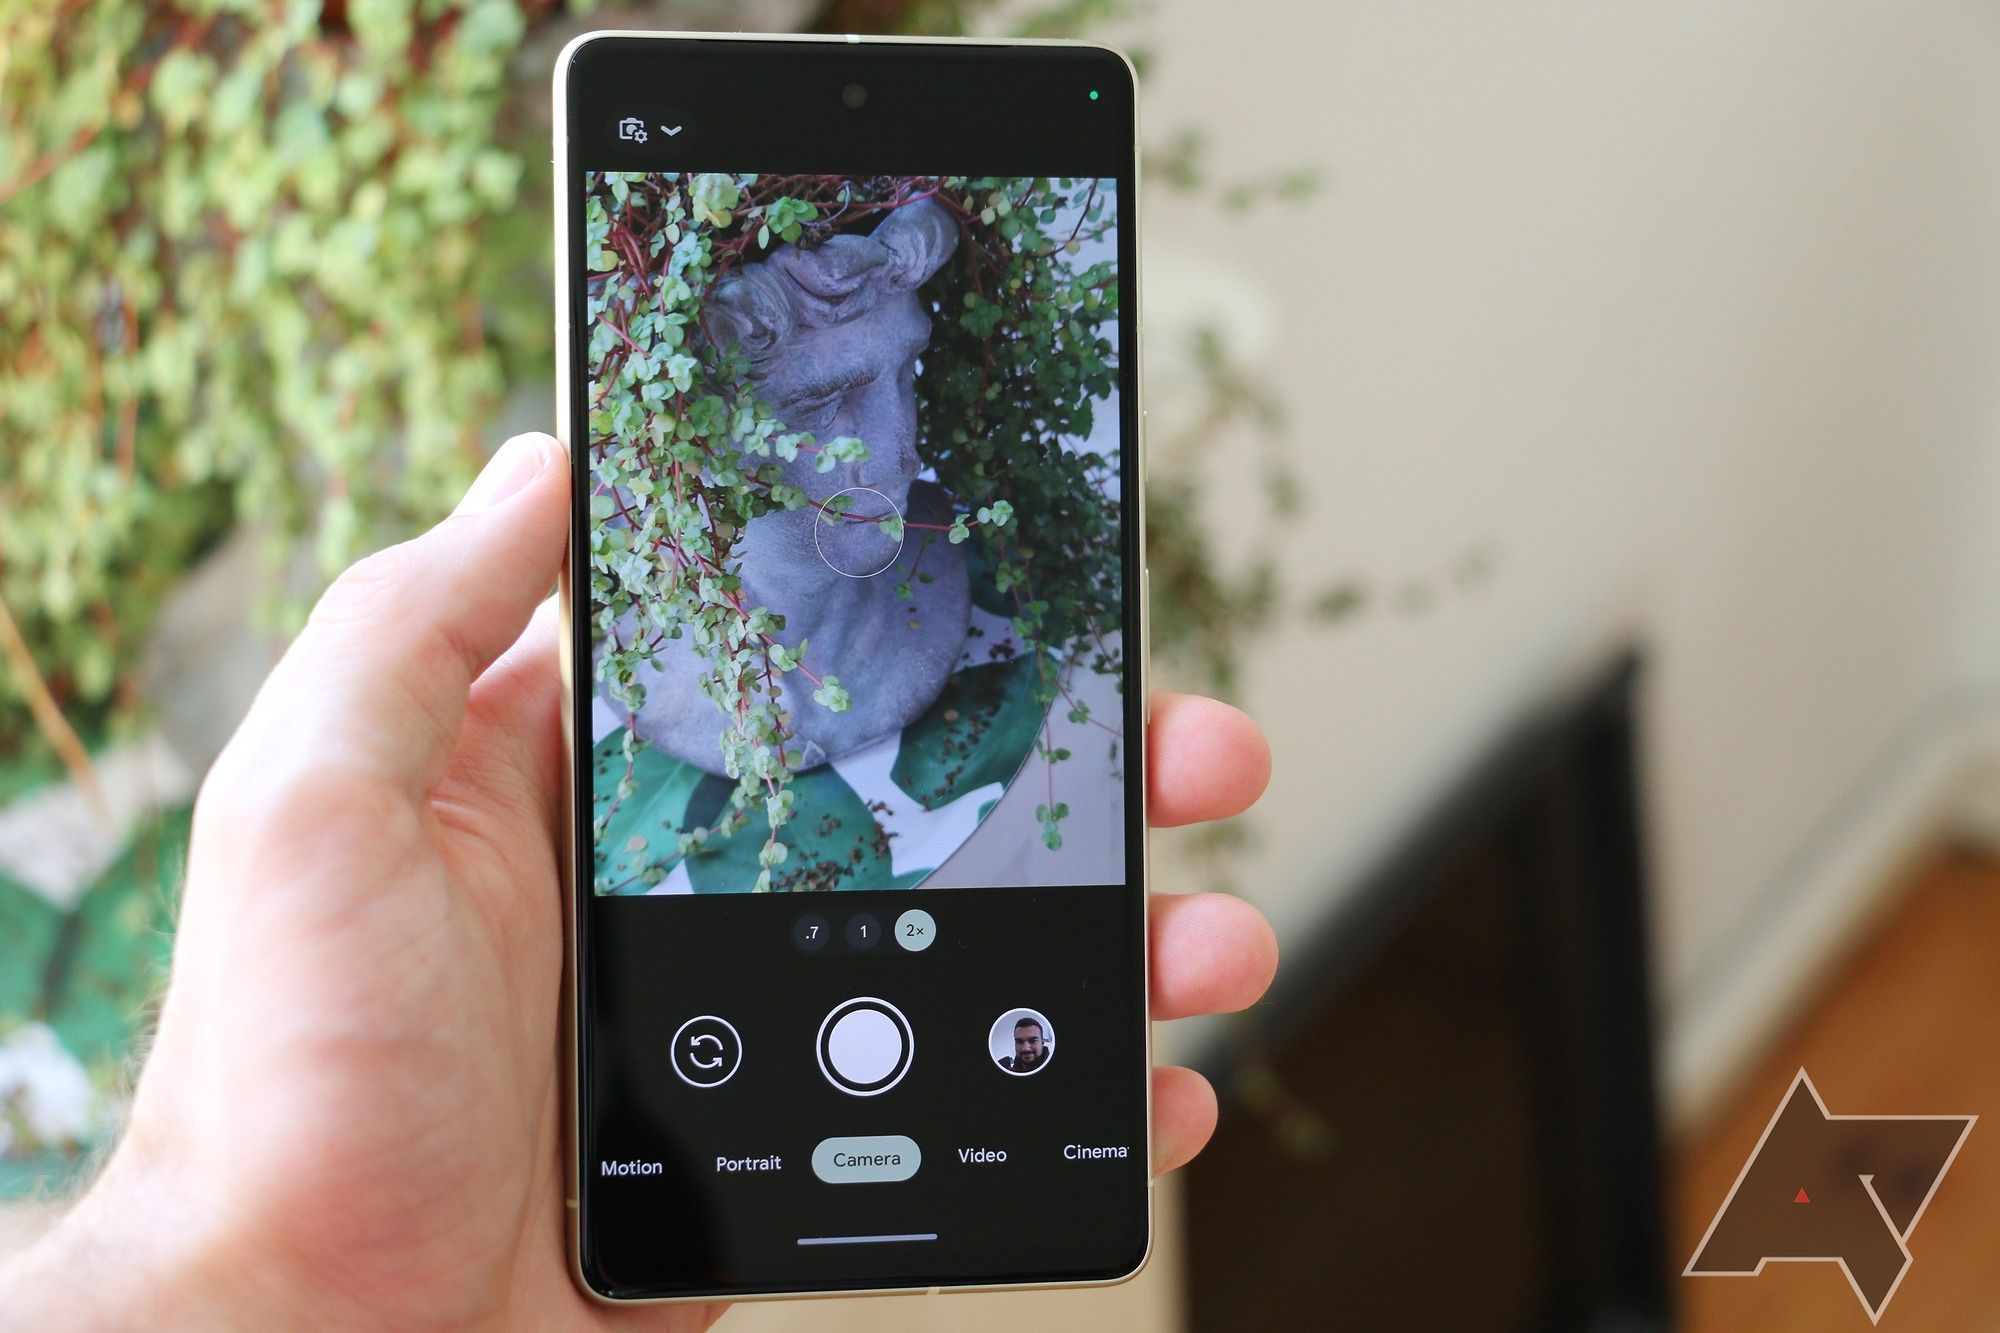 The Google Pixel 7 handheld, with the camera app visible on the screen